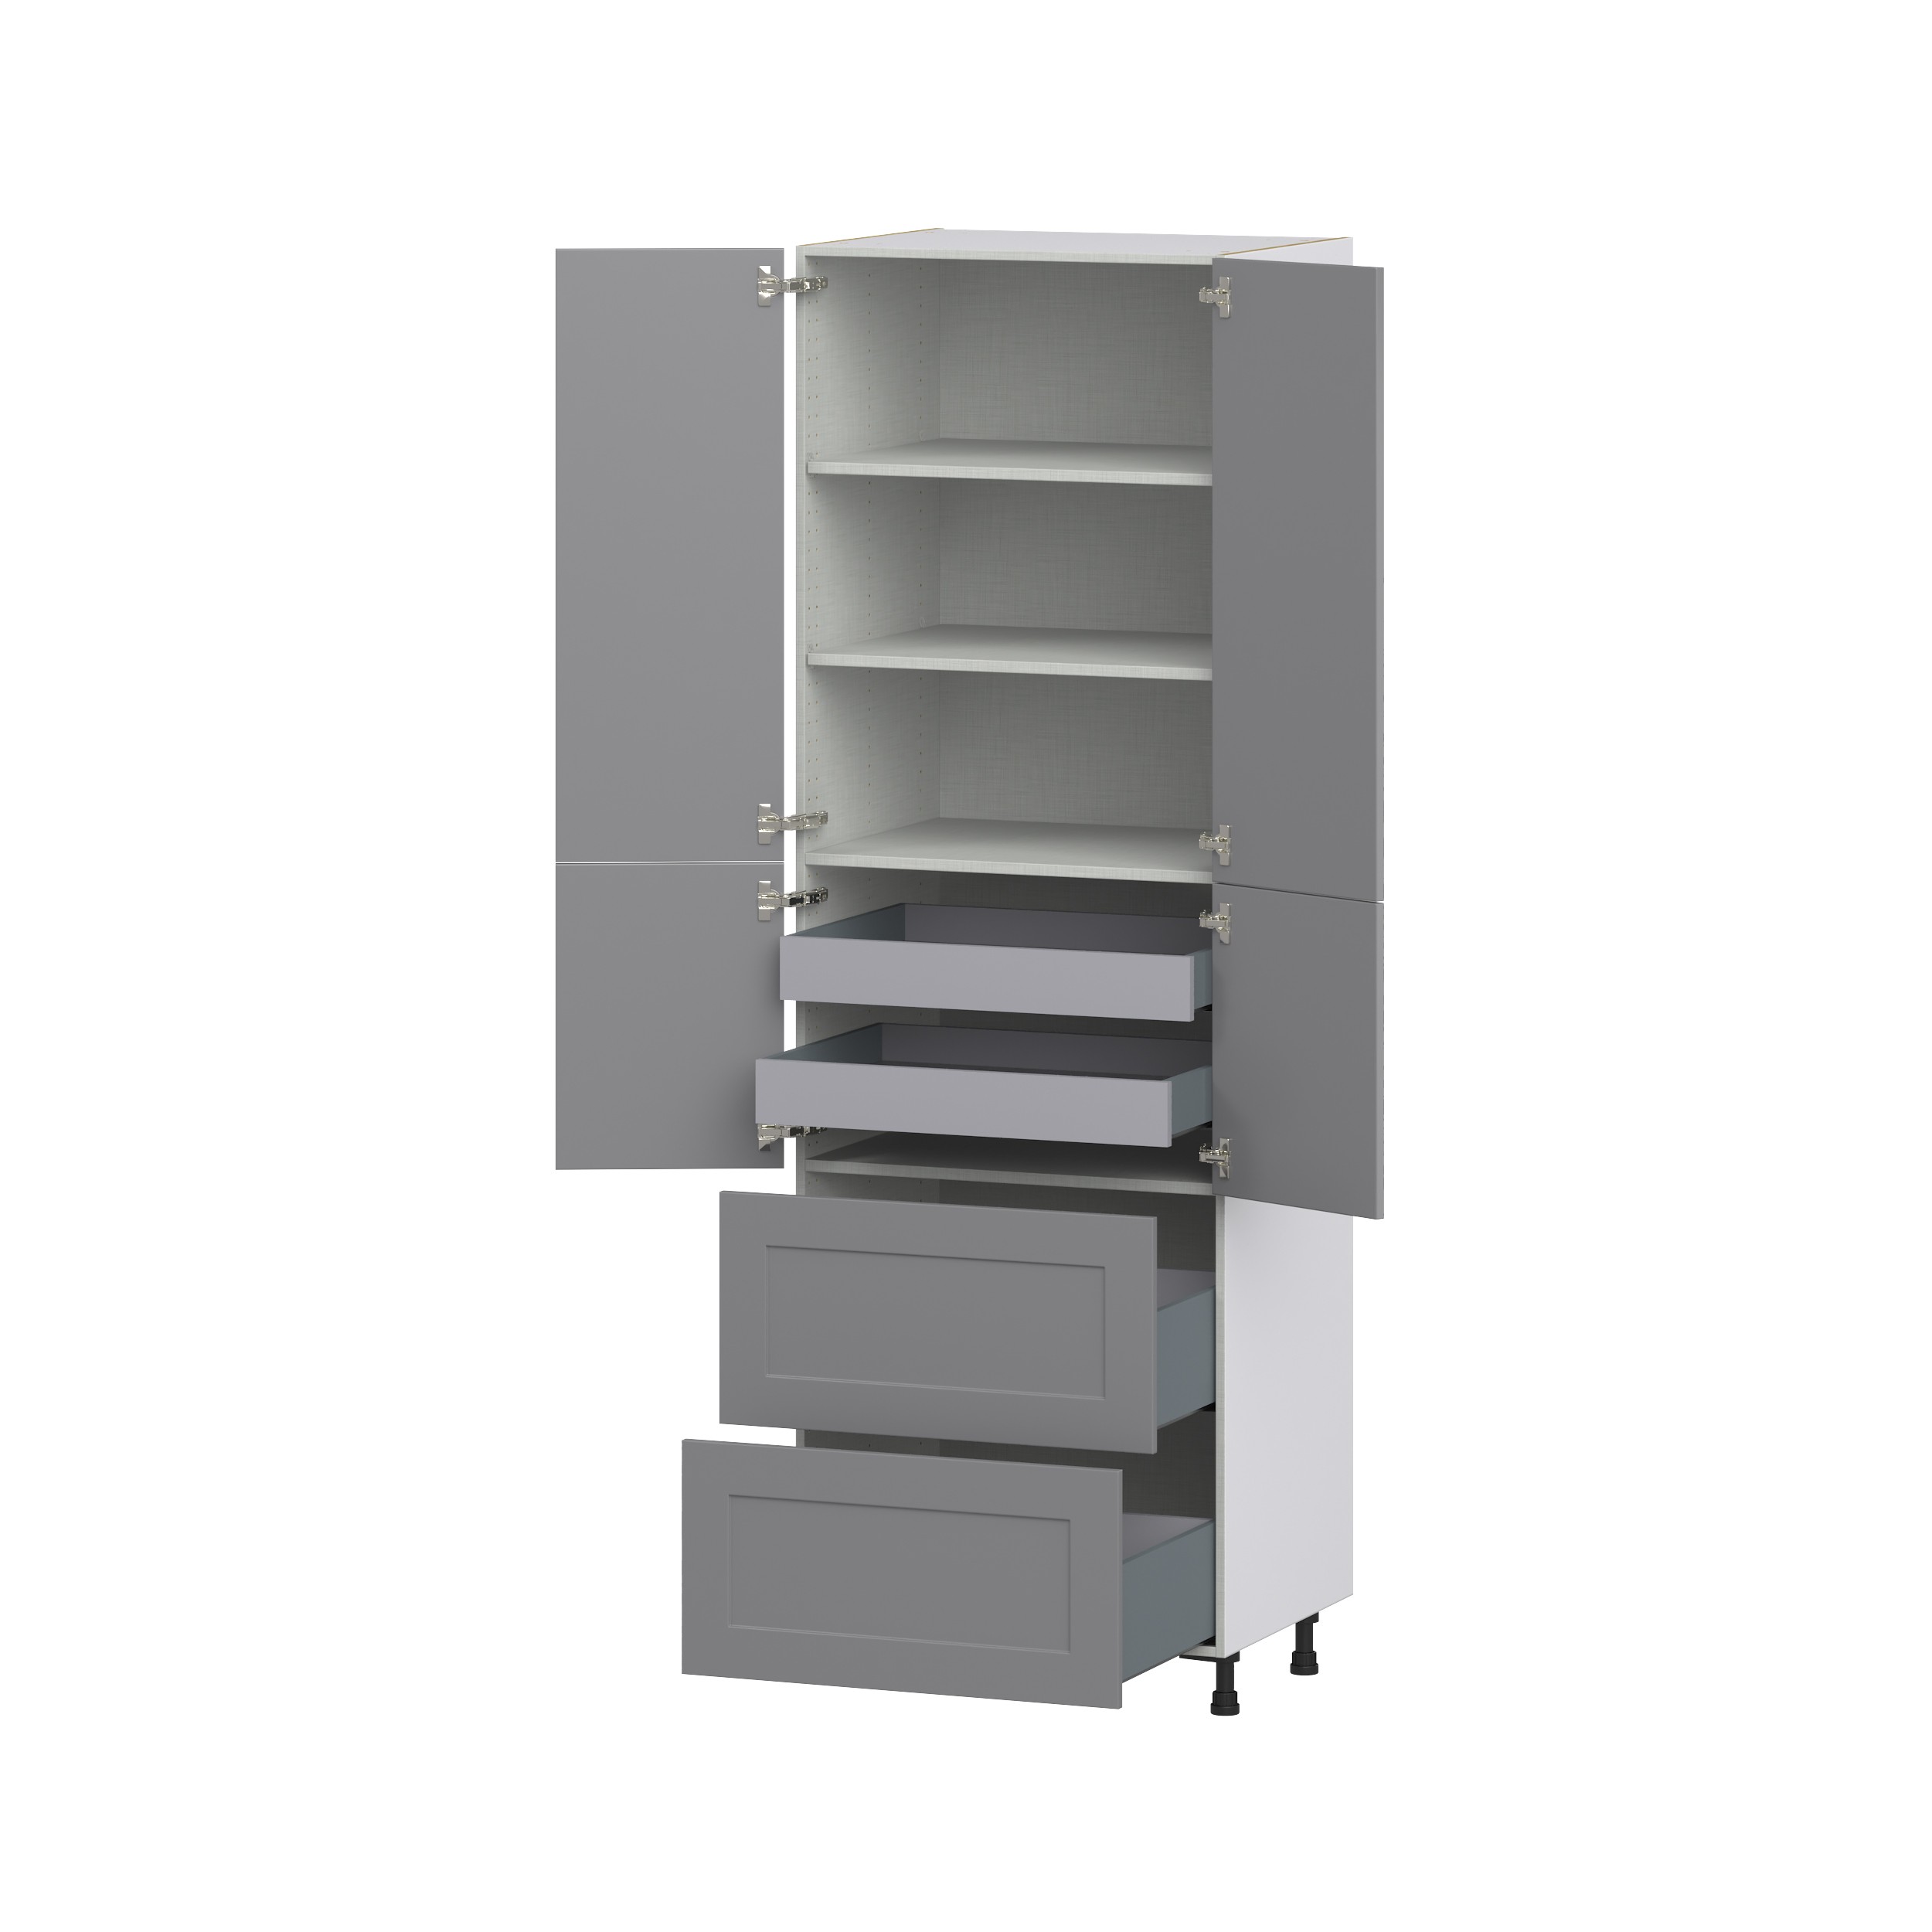 Willow Painted Slate Gray Shaker Assembled Pantry Cabinet 4 Doors with 2 Drawers and 2 Inner Drawers (30 in. W X 94.5 in. H X 24 in. D)